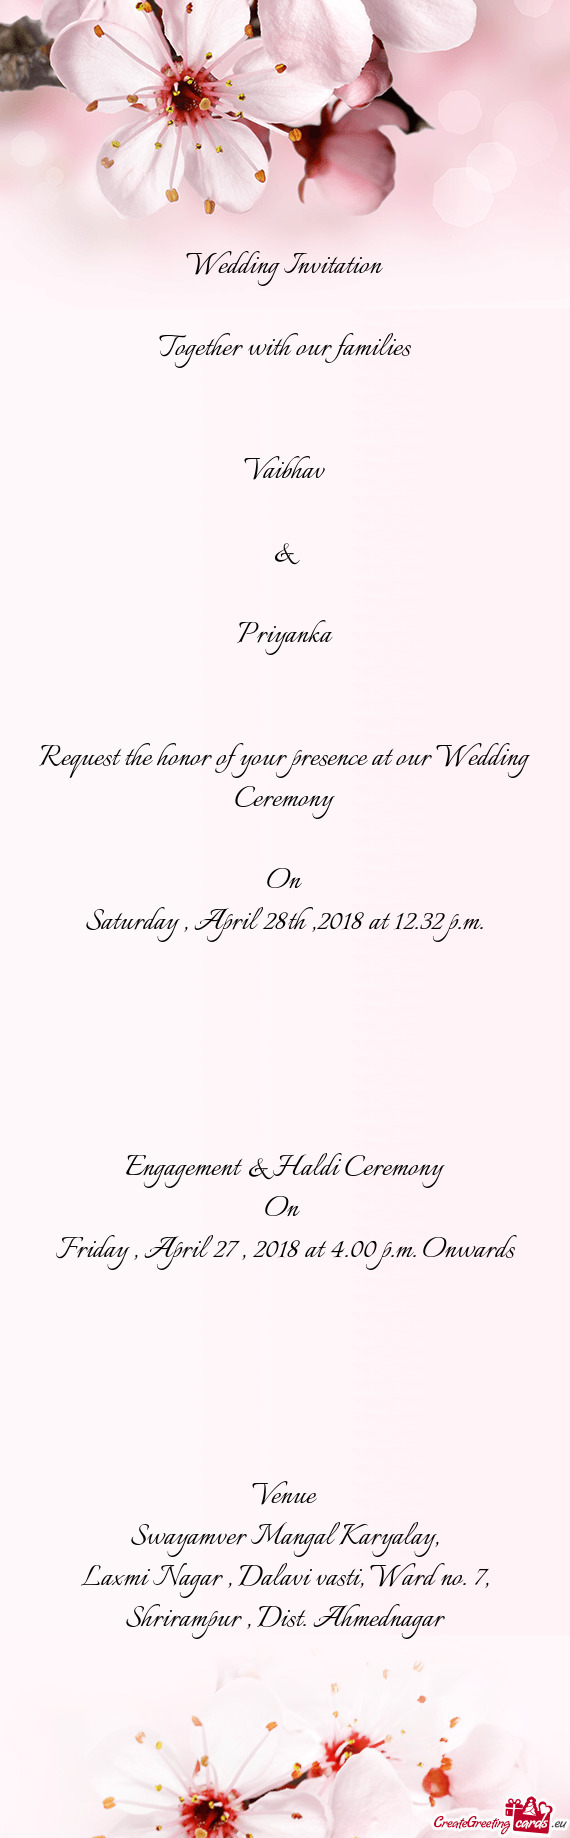 Wedding Invitation
 
 Together with our families
 
 
 Vaibhav
 
 & 
 
 Priyanka
 
 
 Request the hon